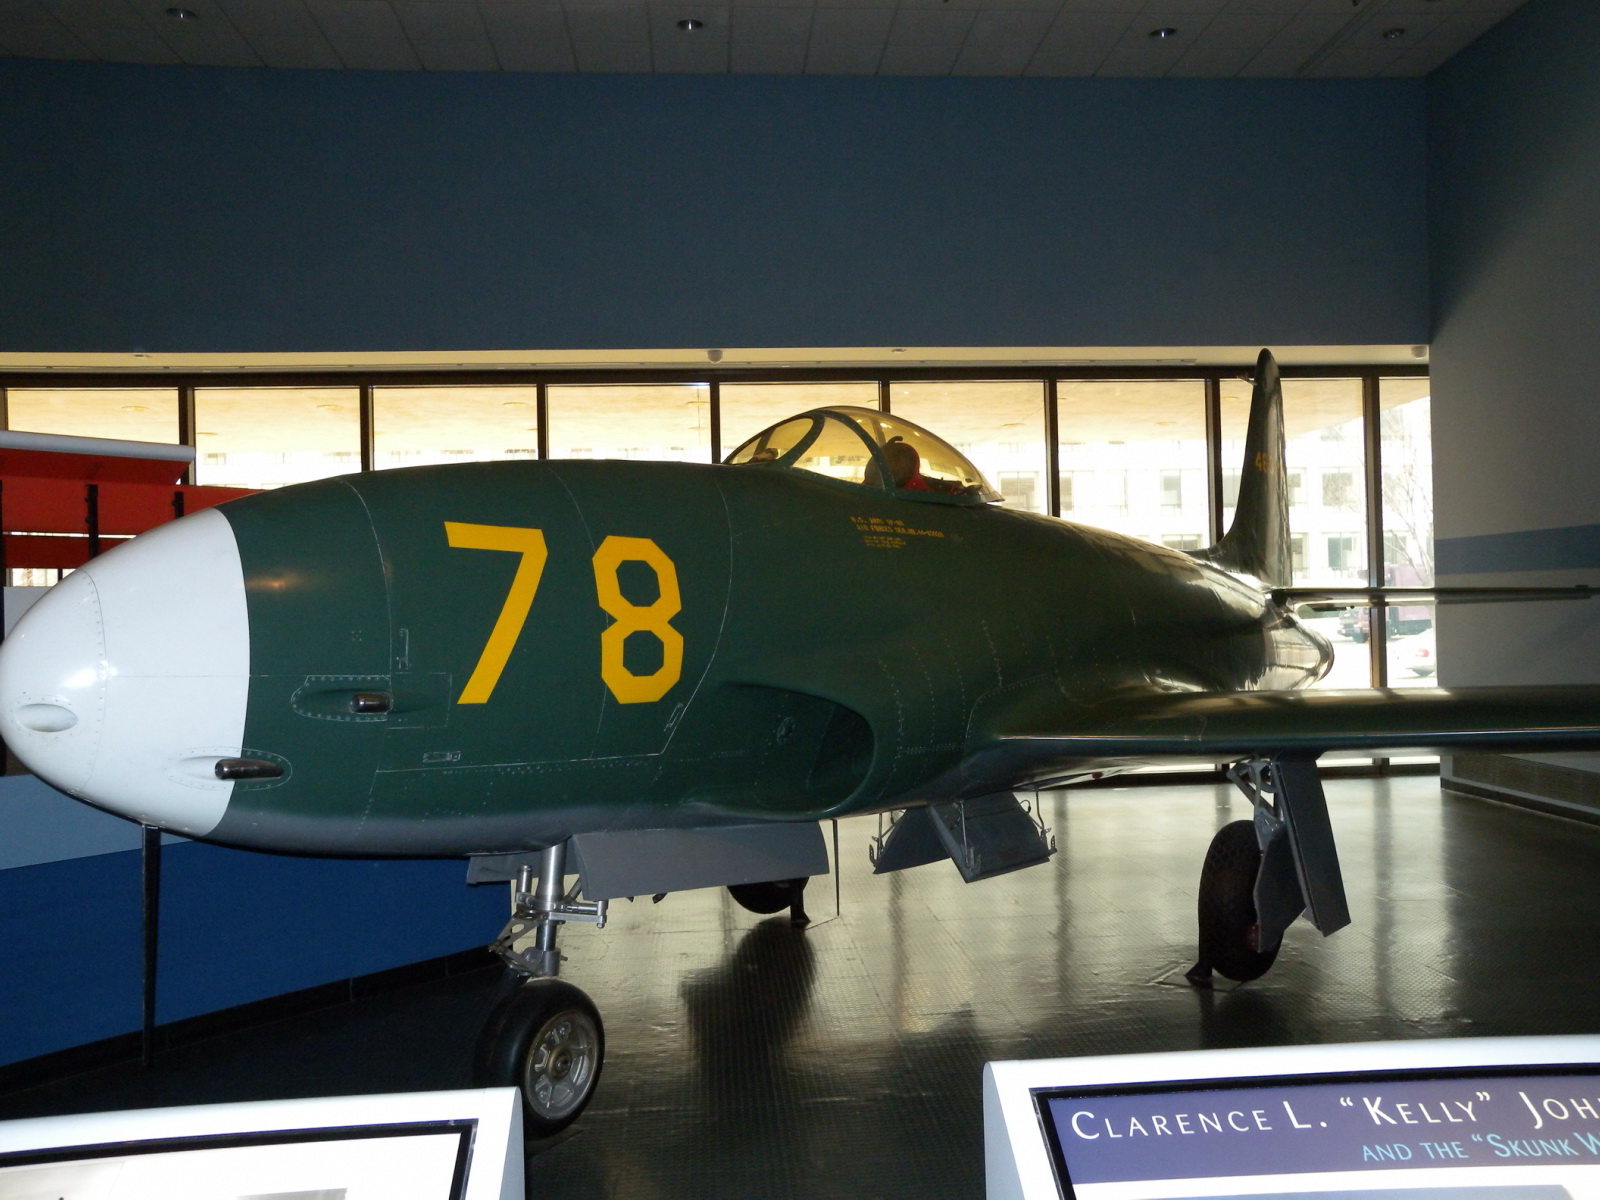 the fighter jet is green and yellow in color